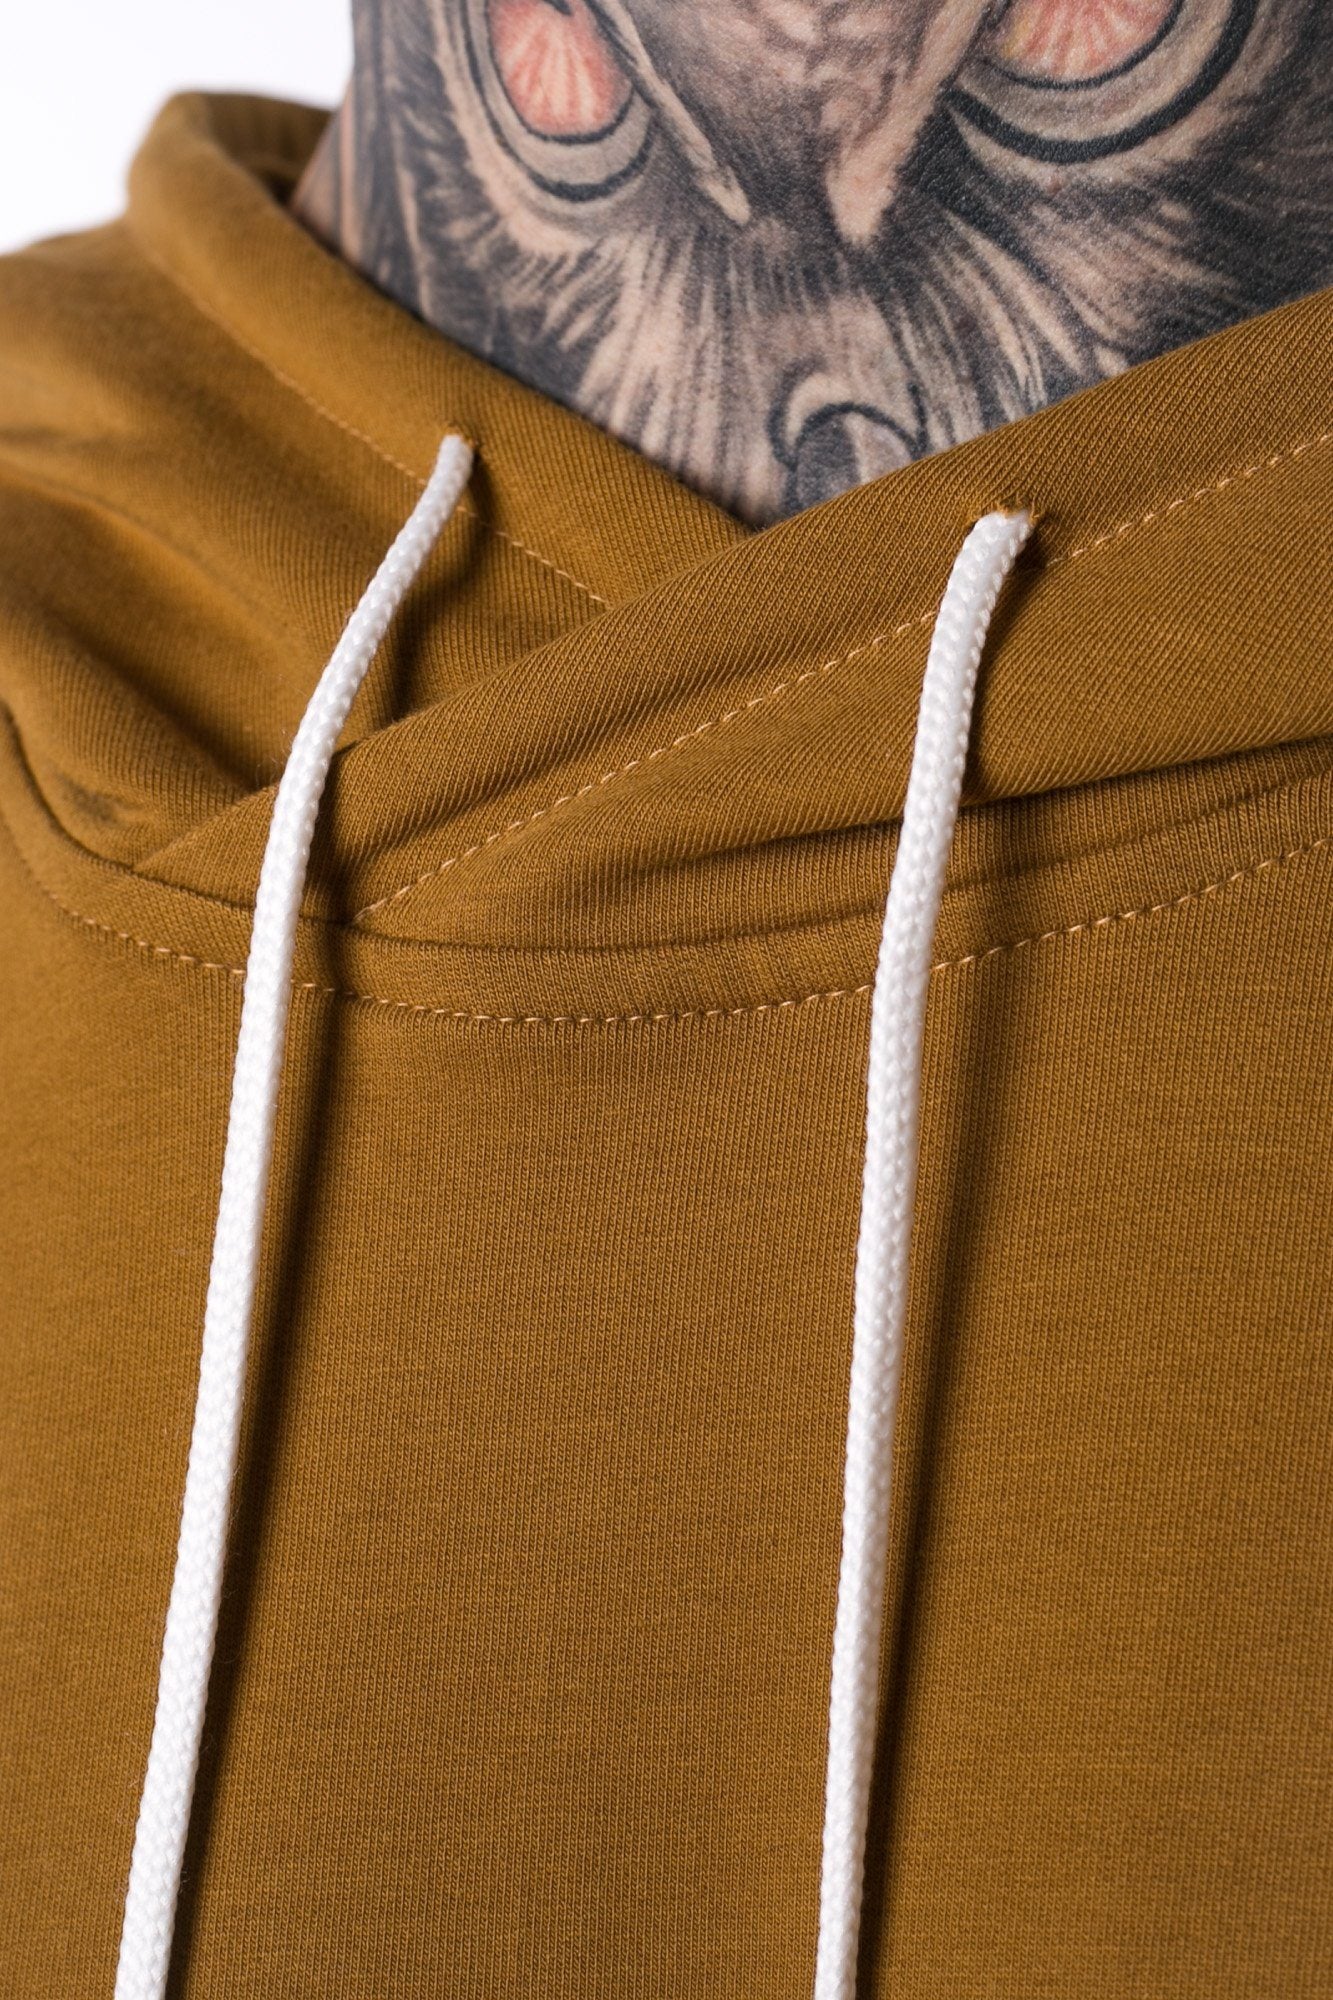 The Man Panelled Hoody 17 // umber